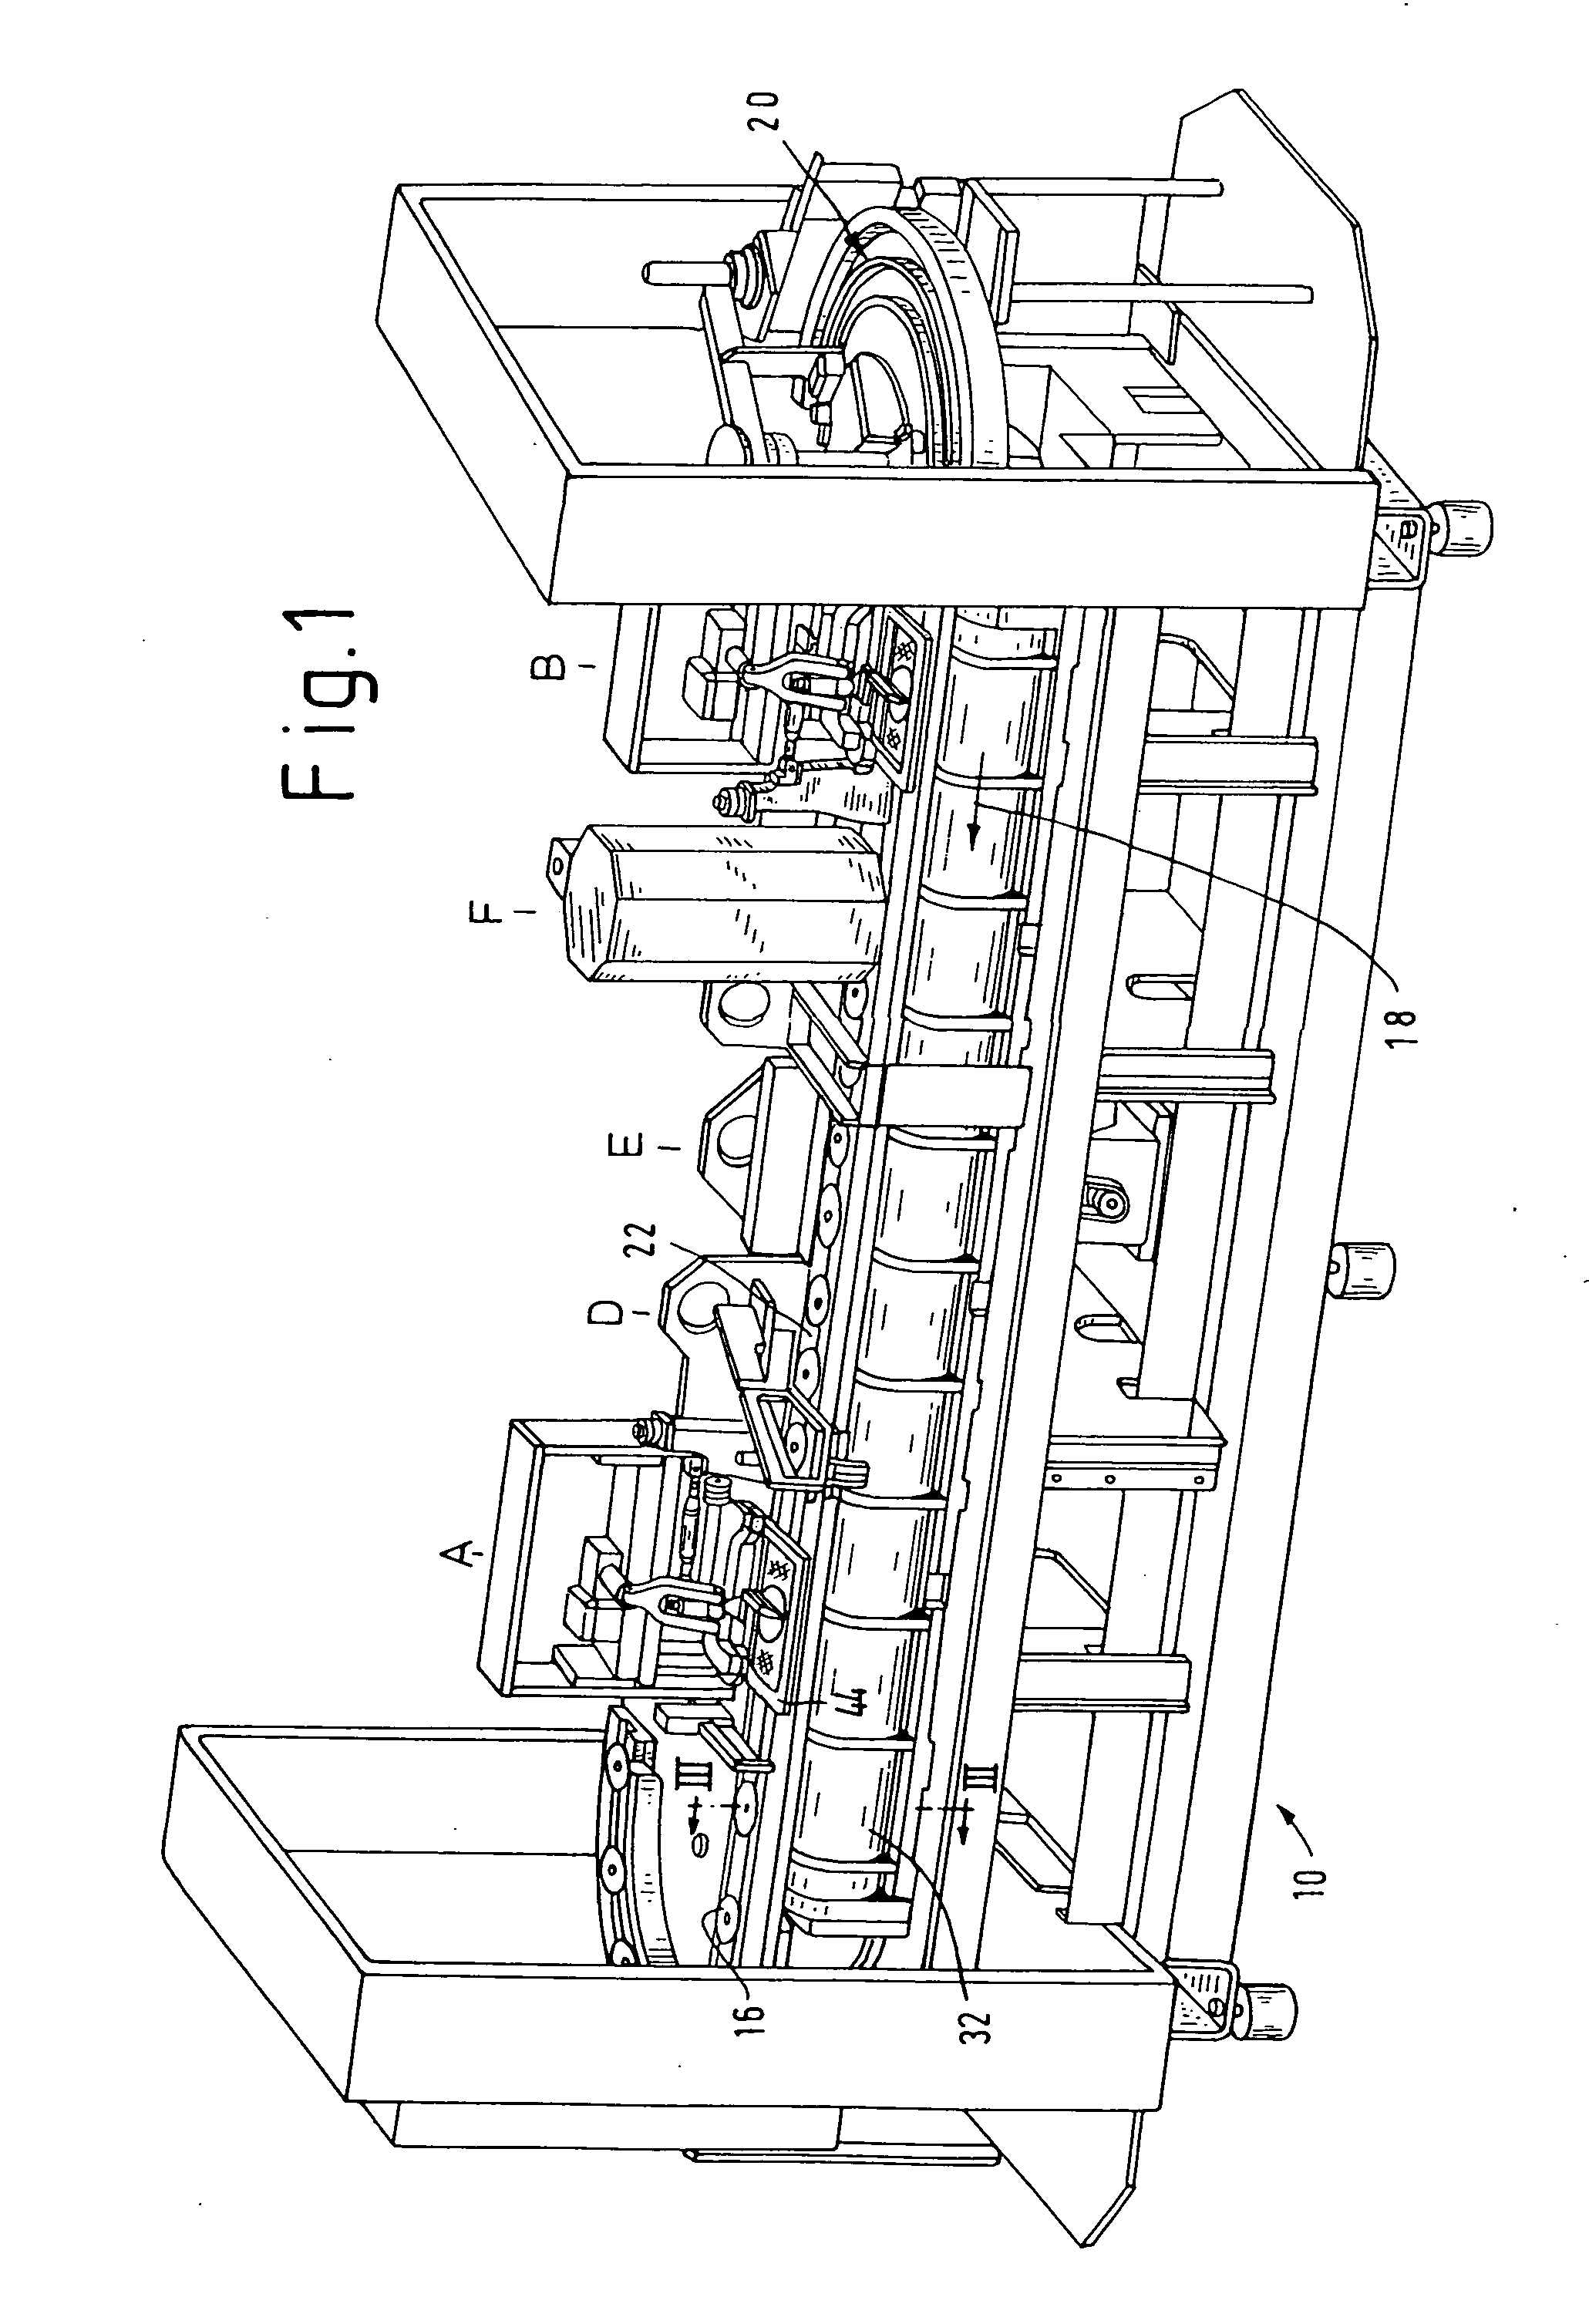 Apparatus for decorating stiff objects by screen printing